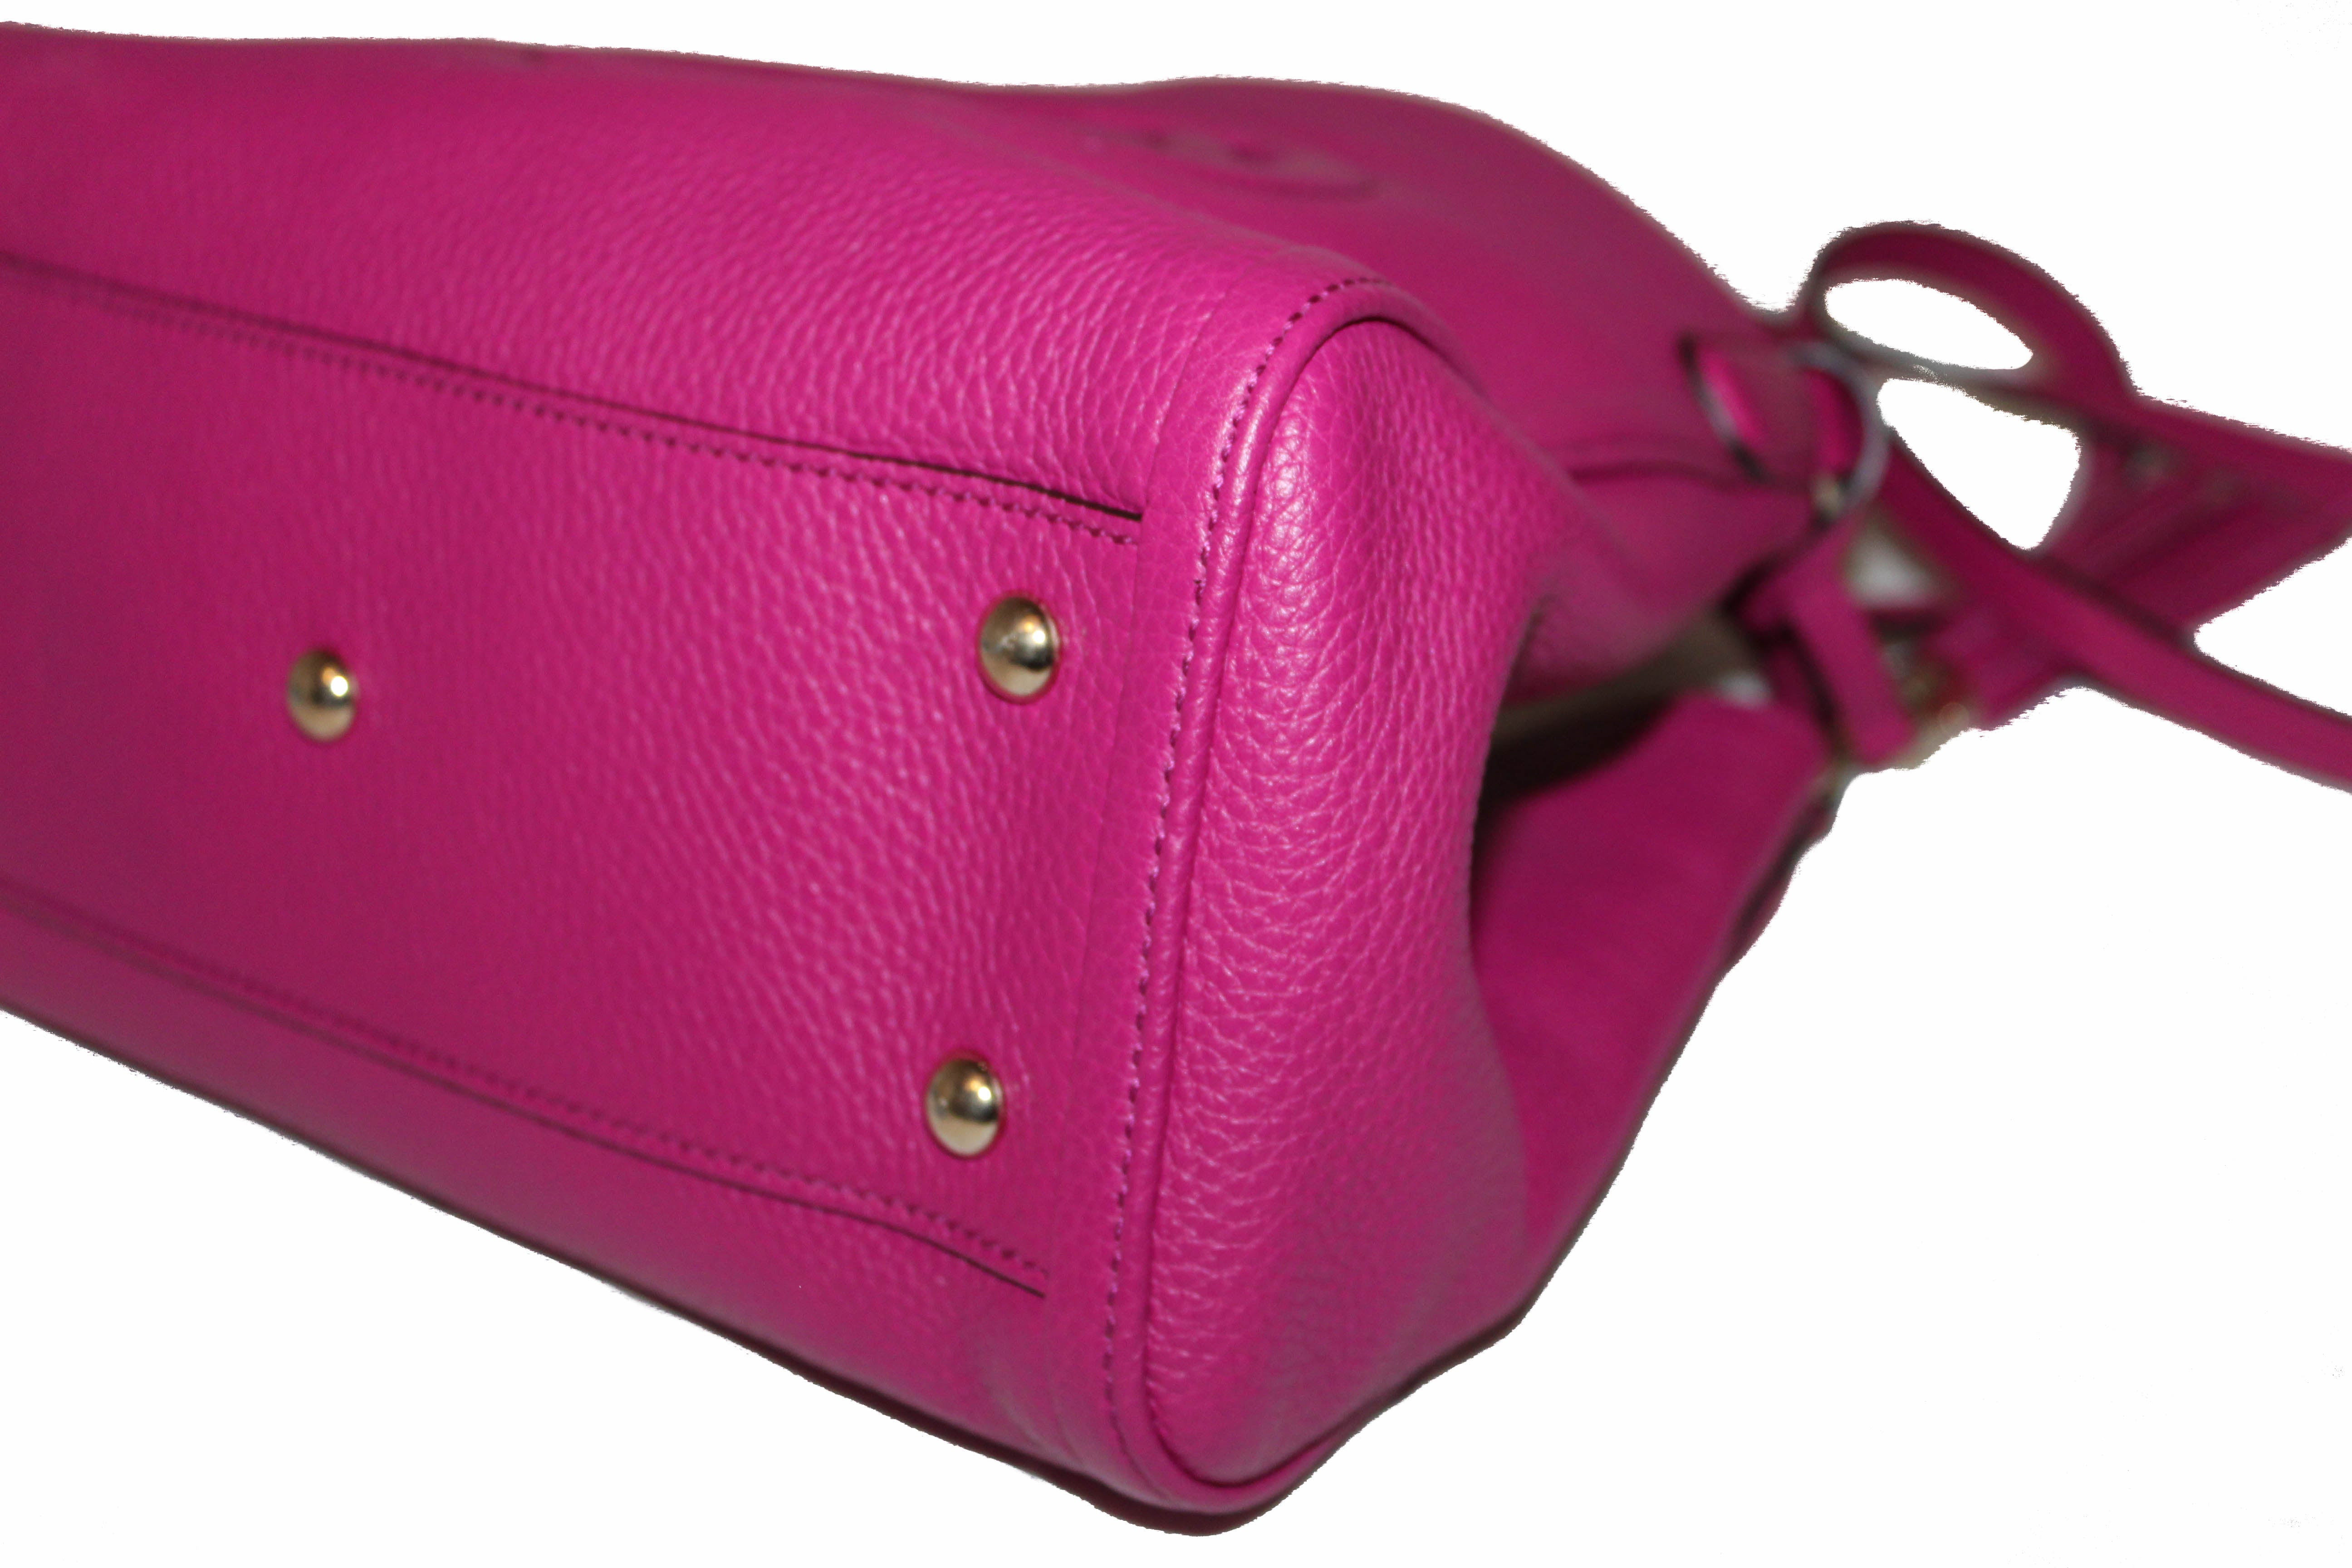 Authentic Gucci Magenta Soho Convertible Leather Small Shoulder Bag